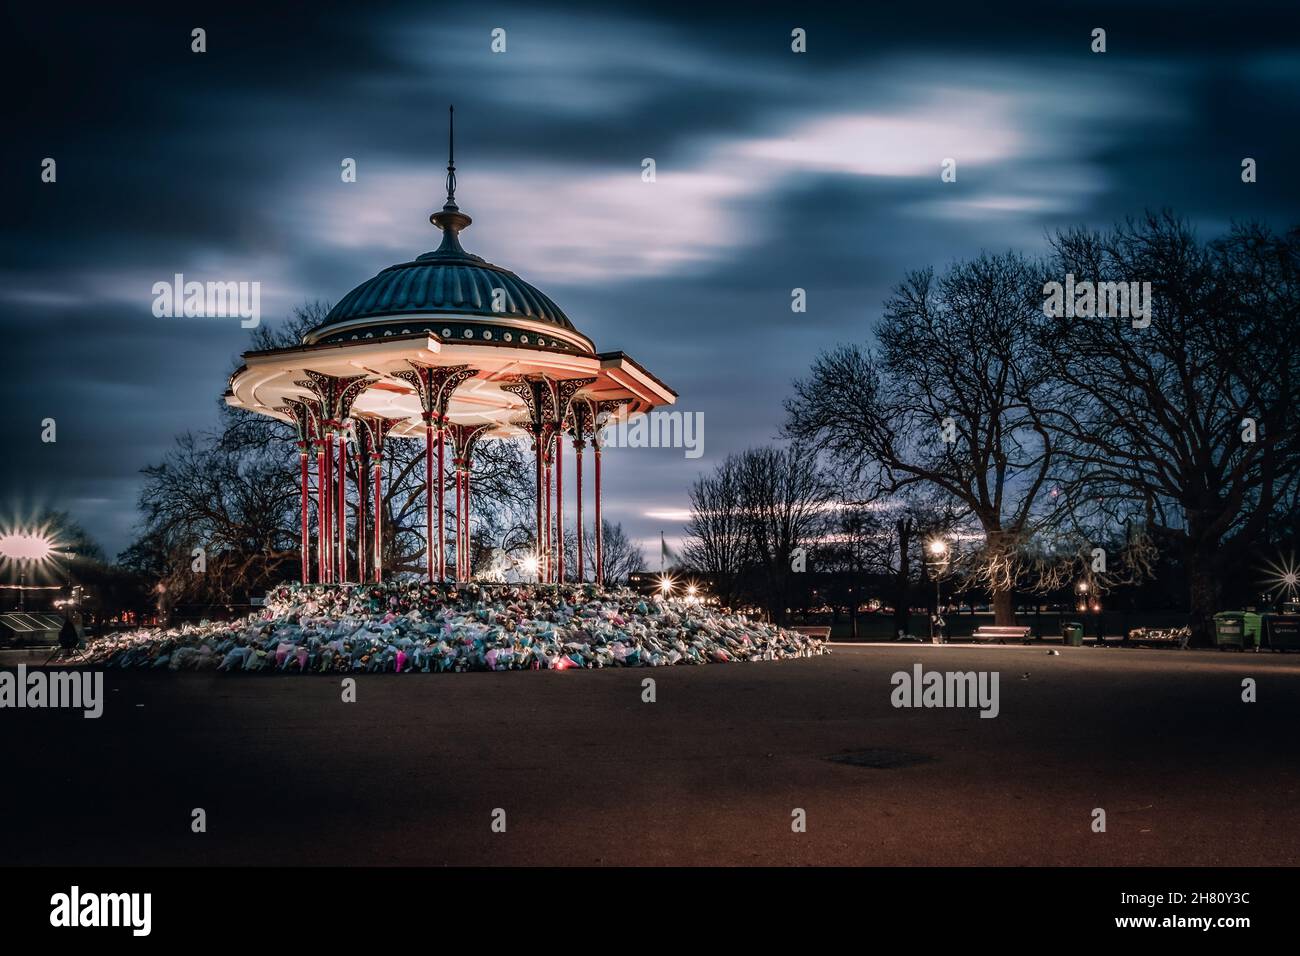 Clapham Common, London, UK - March 13, 2021: Clapham Common Bandstand with Sarah Everard Memorial and Tributes Stock Photo